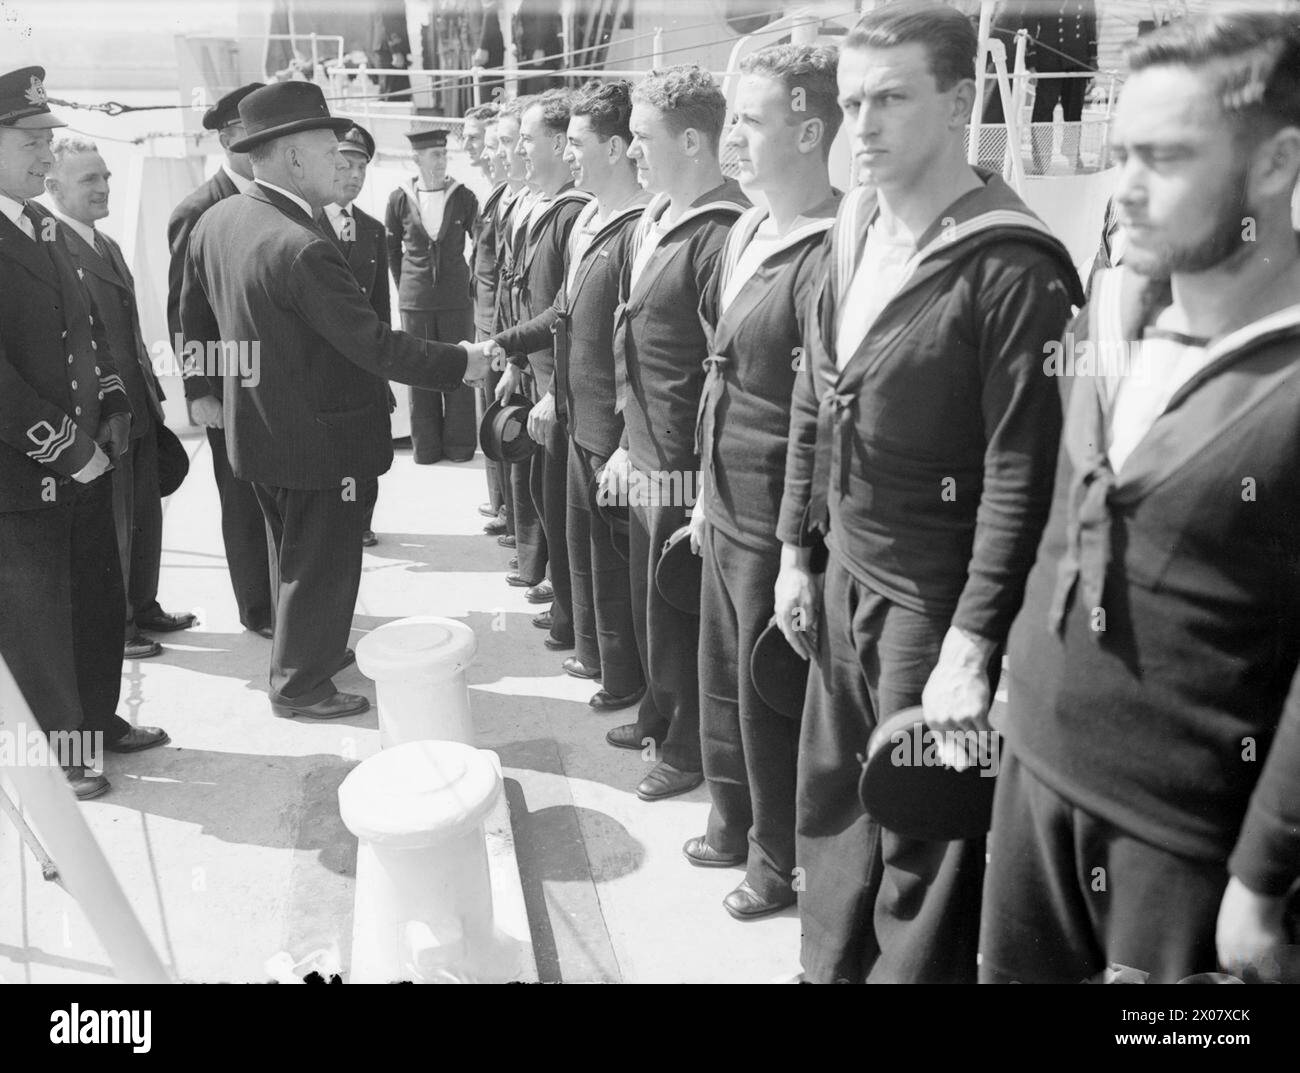 NEW ZEALAND HIGH COMMISSIONER VISITS THE NEW ZEALAND CORVETTE HMNZS ARBUTUS. 19 JUNE 1944, GREENOCK. - Mr Jordan, the High Commissioner, shaking hands with members of the ship's company of the ARBUTUS. Left to right in this rank are: Able Seaman S E Ogg, from Dunedin; Ordinary Seaman B M McRobie, from Wellington; Able Seaman E W Sharp, from London (England); Able Seaman W E Brown, from Auckland; Able Seaman V G Saunders, from Tauranga; Ordinary Seaman J L Carmine, from New Plymouth; Ordinary Seaman J Mains, from Sawyers Bay; Ordinary Seaman B Couchman, from Wanganui; Ordinary Seaman W Berghan, Stock Photo